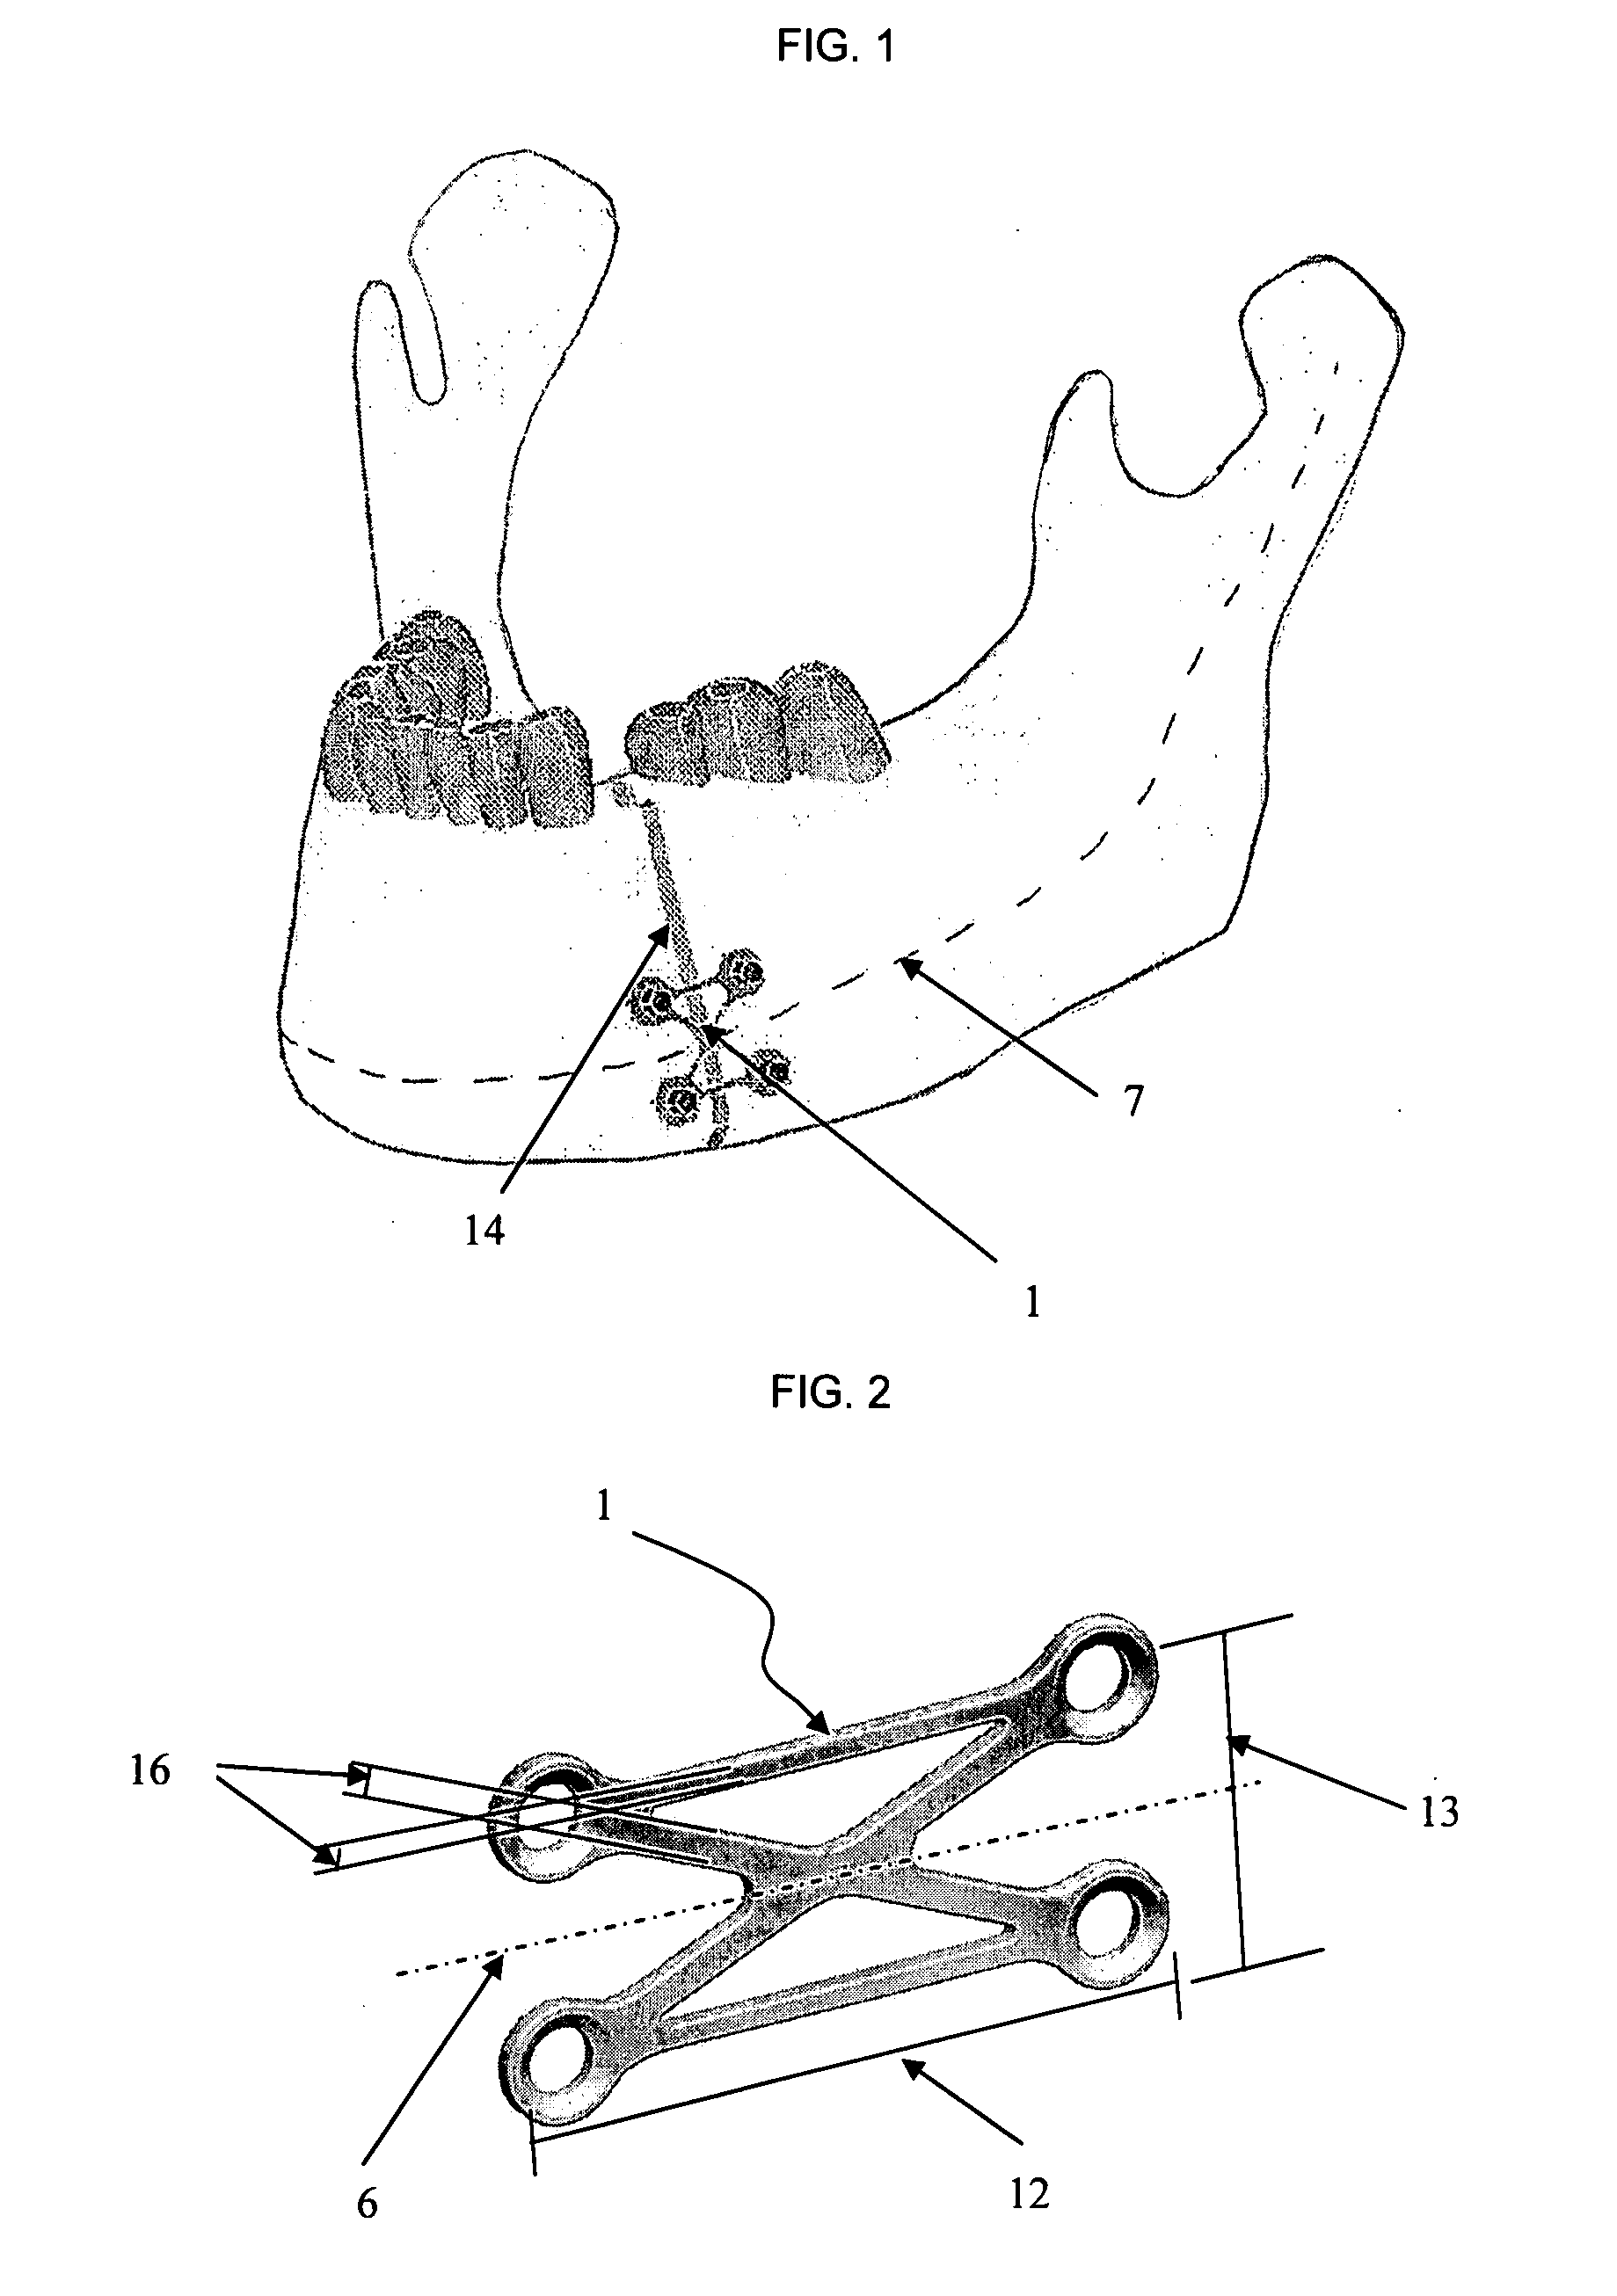 Osteosynthesis plate, method of customizing same, and method for installing same